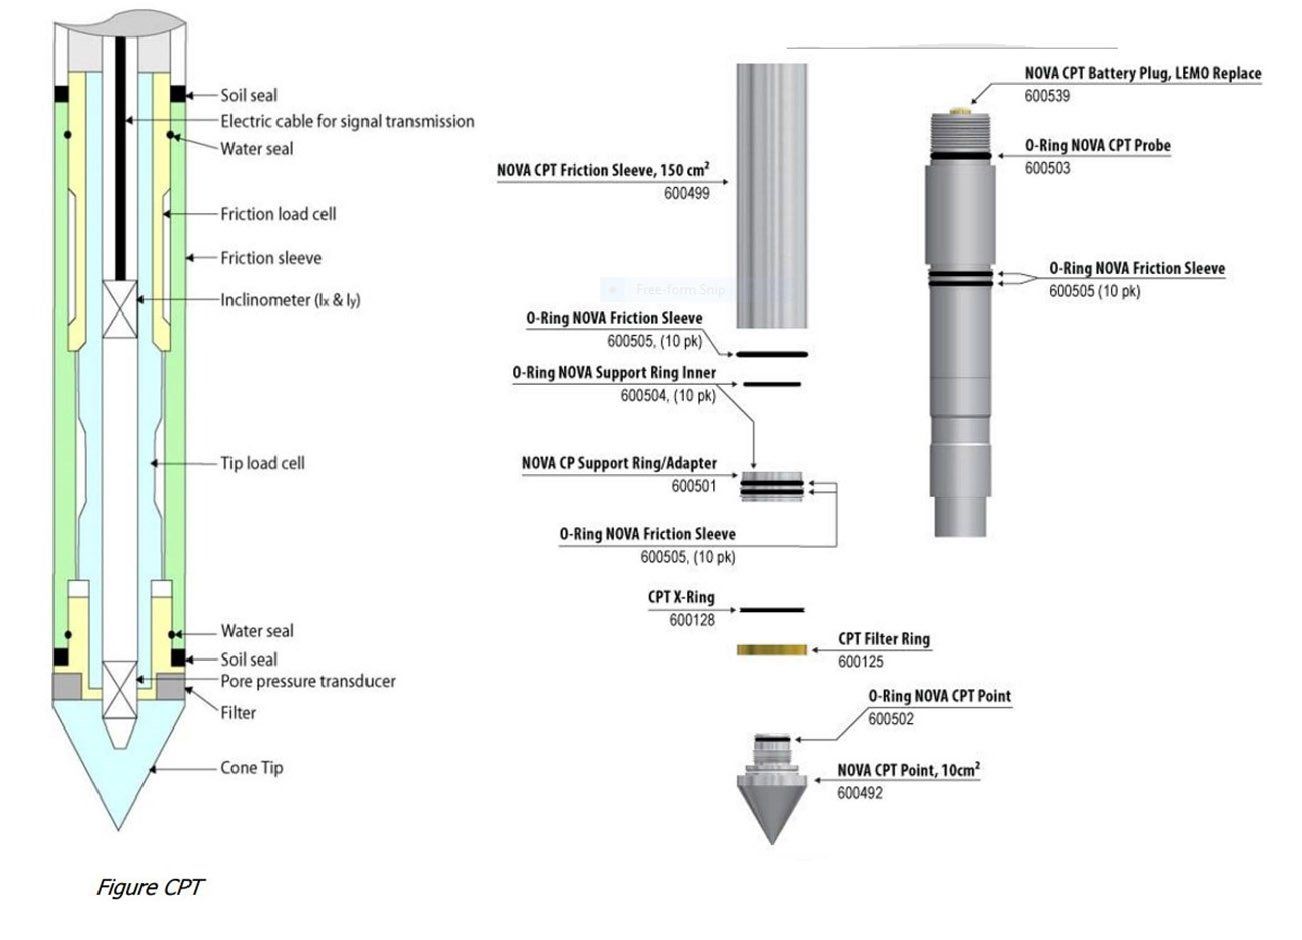 Cone penetration tests